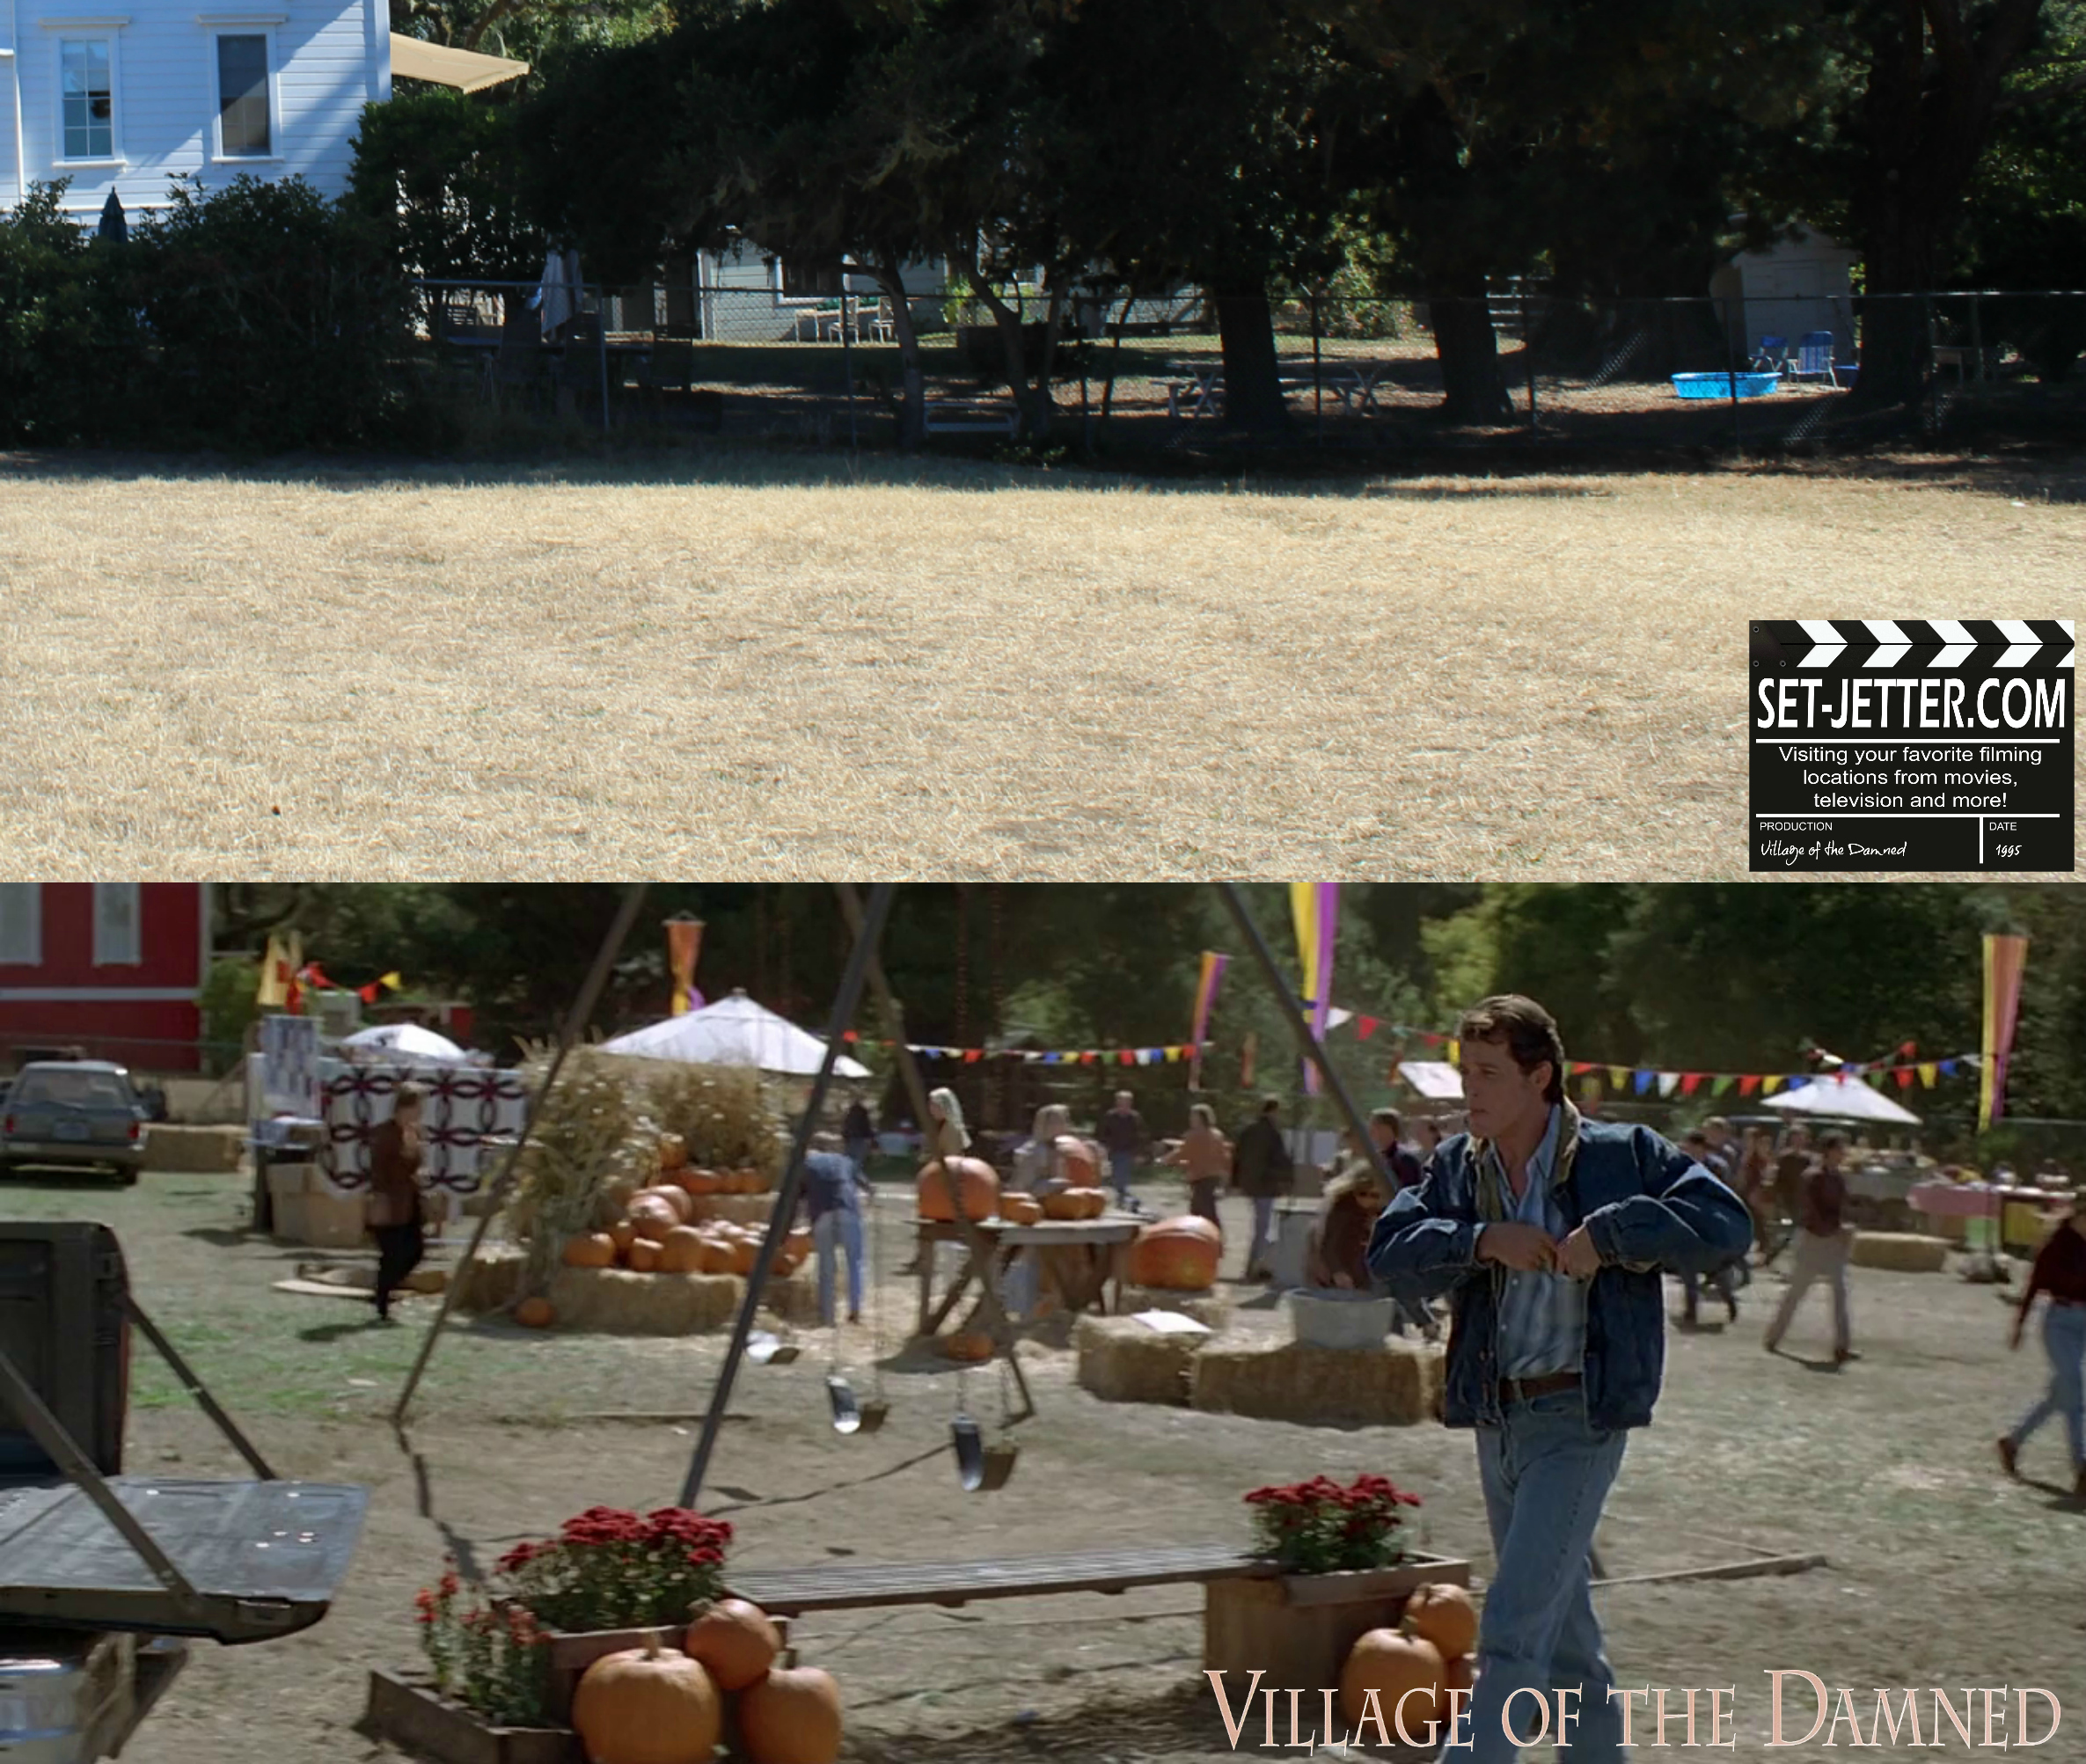 Village of the Damned comparison 14.jpg